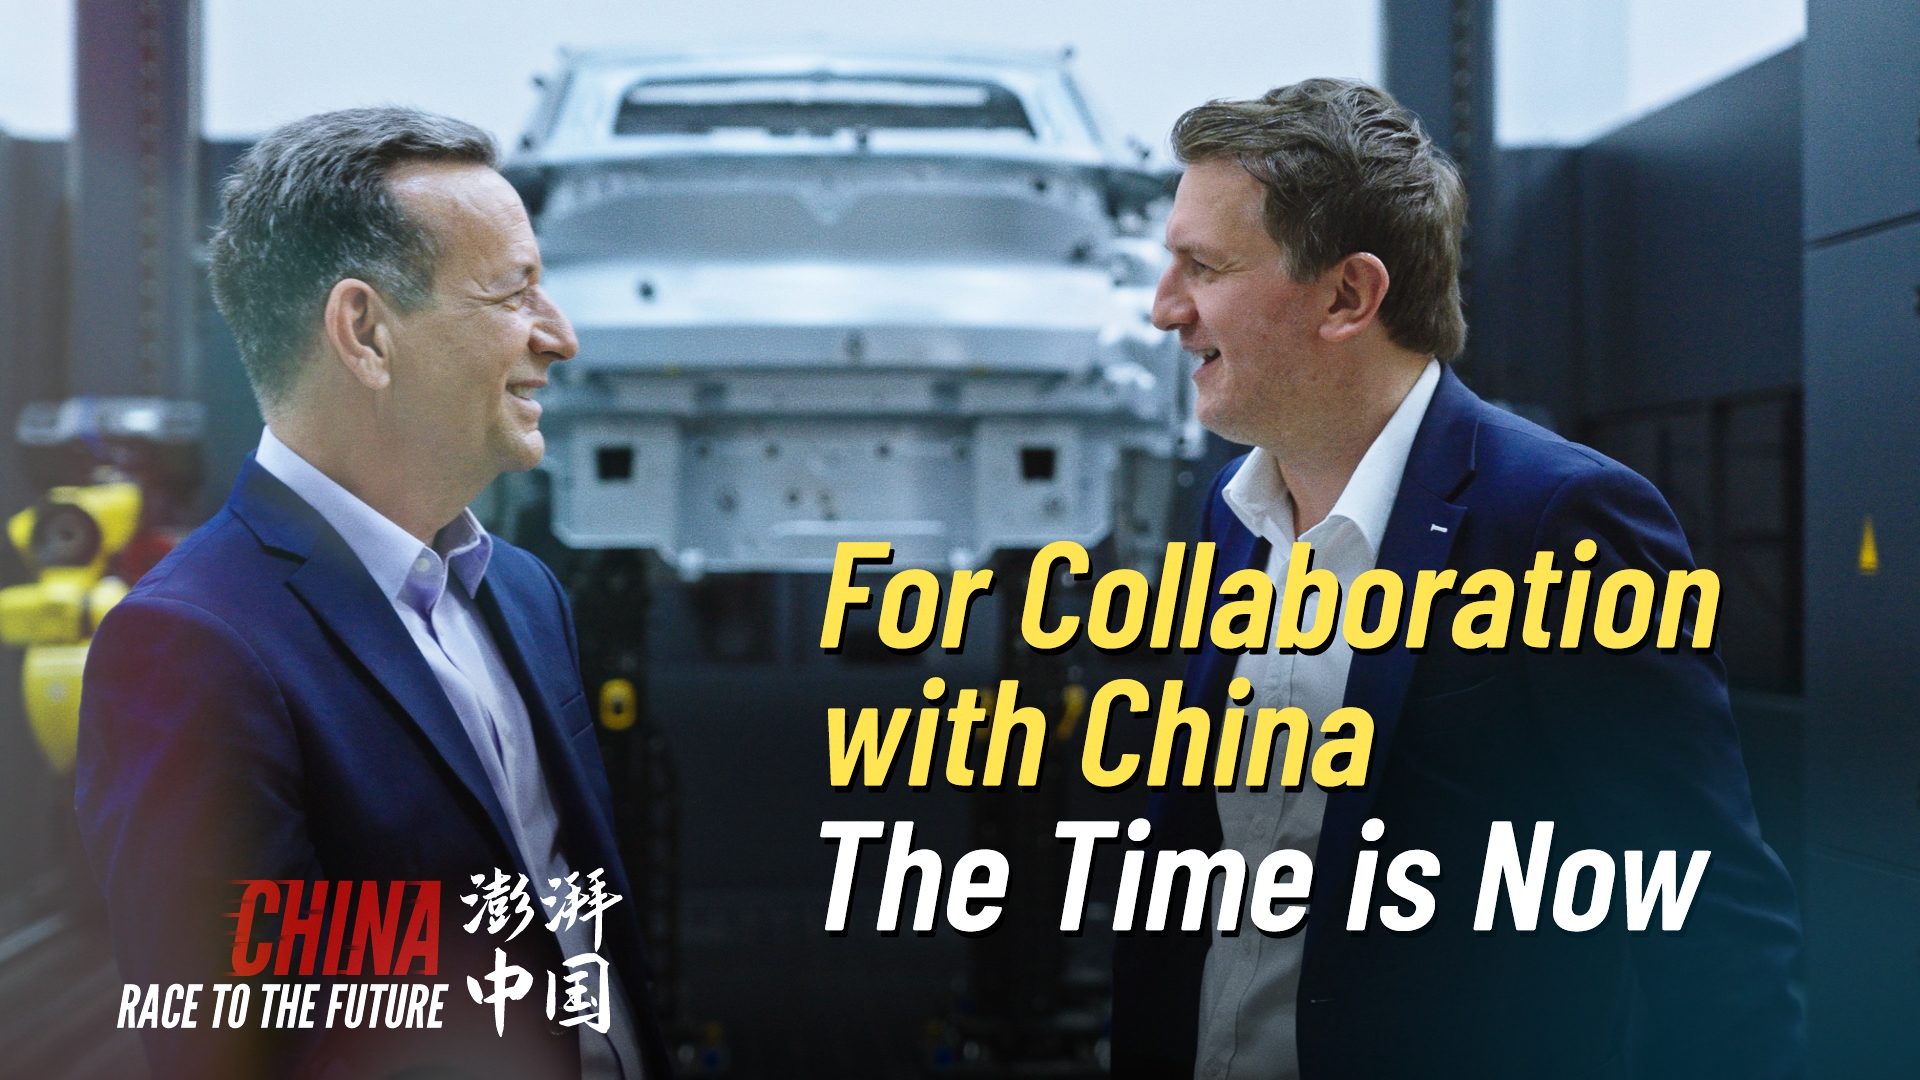 Race to the Future: For Collaboration with China, The Time is Now